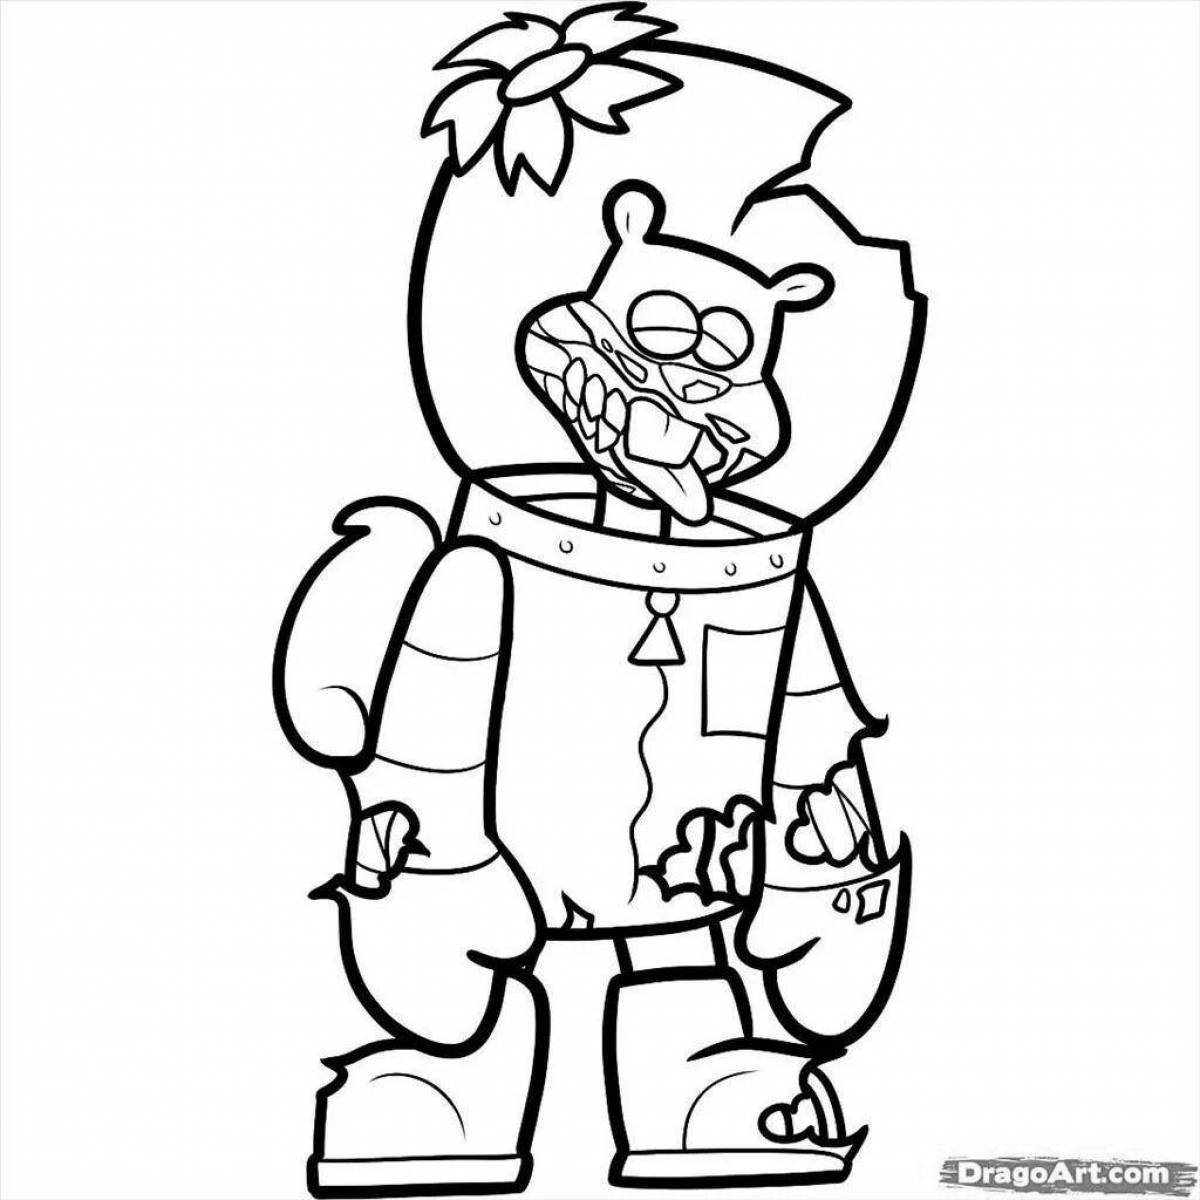 Adorable sand chicks coloring pages